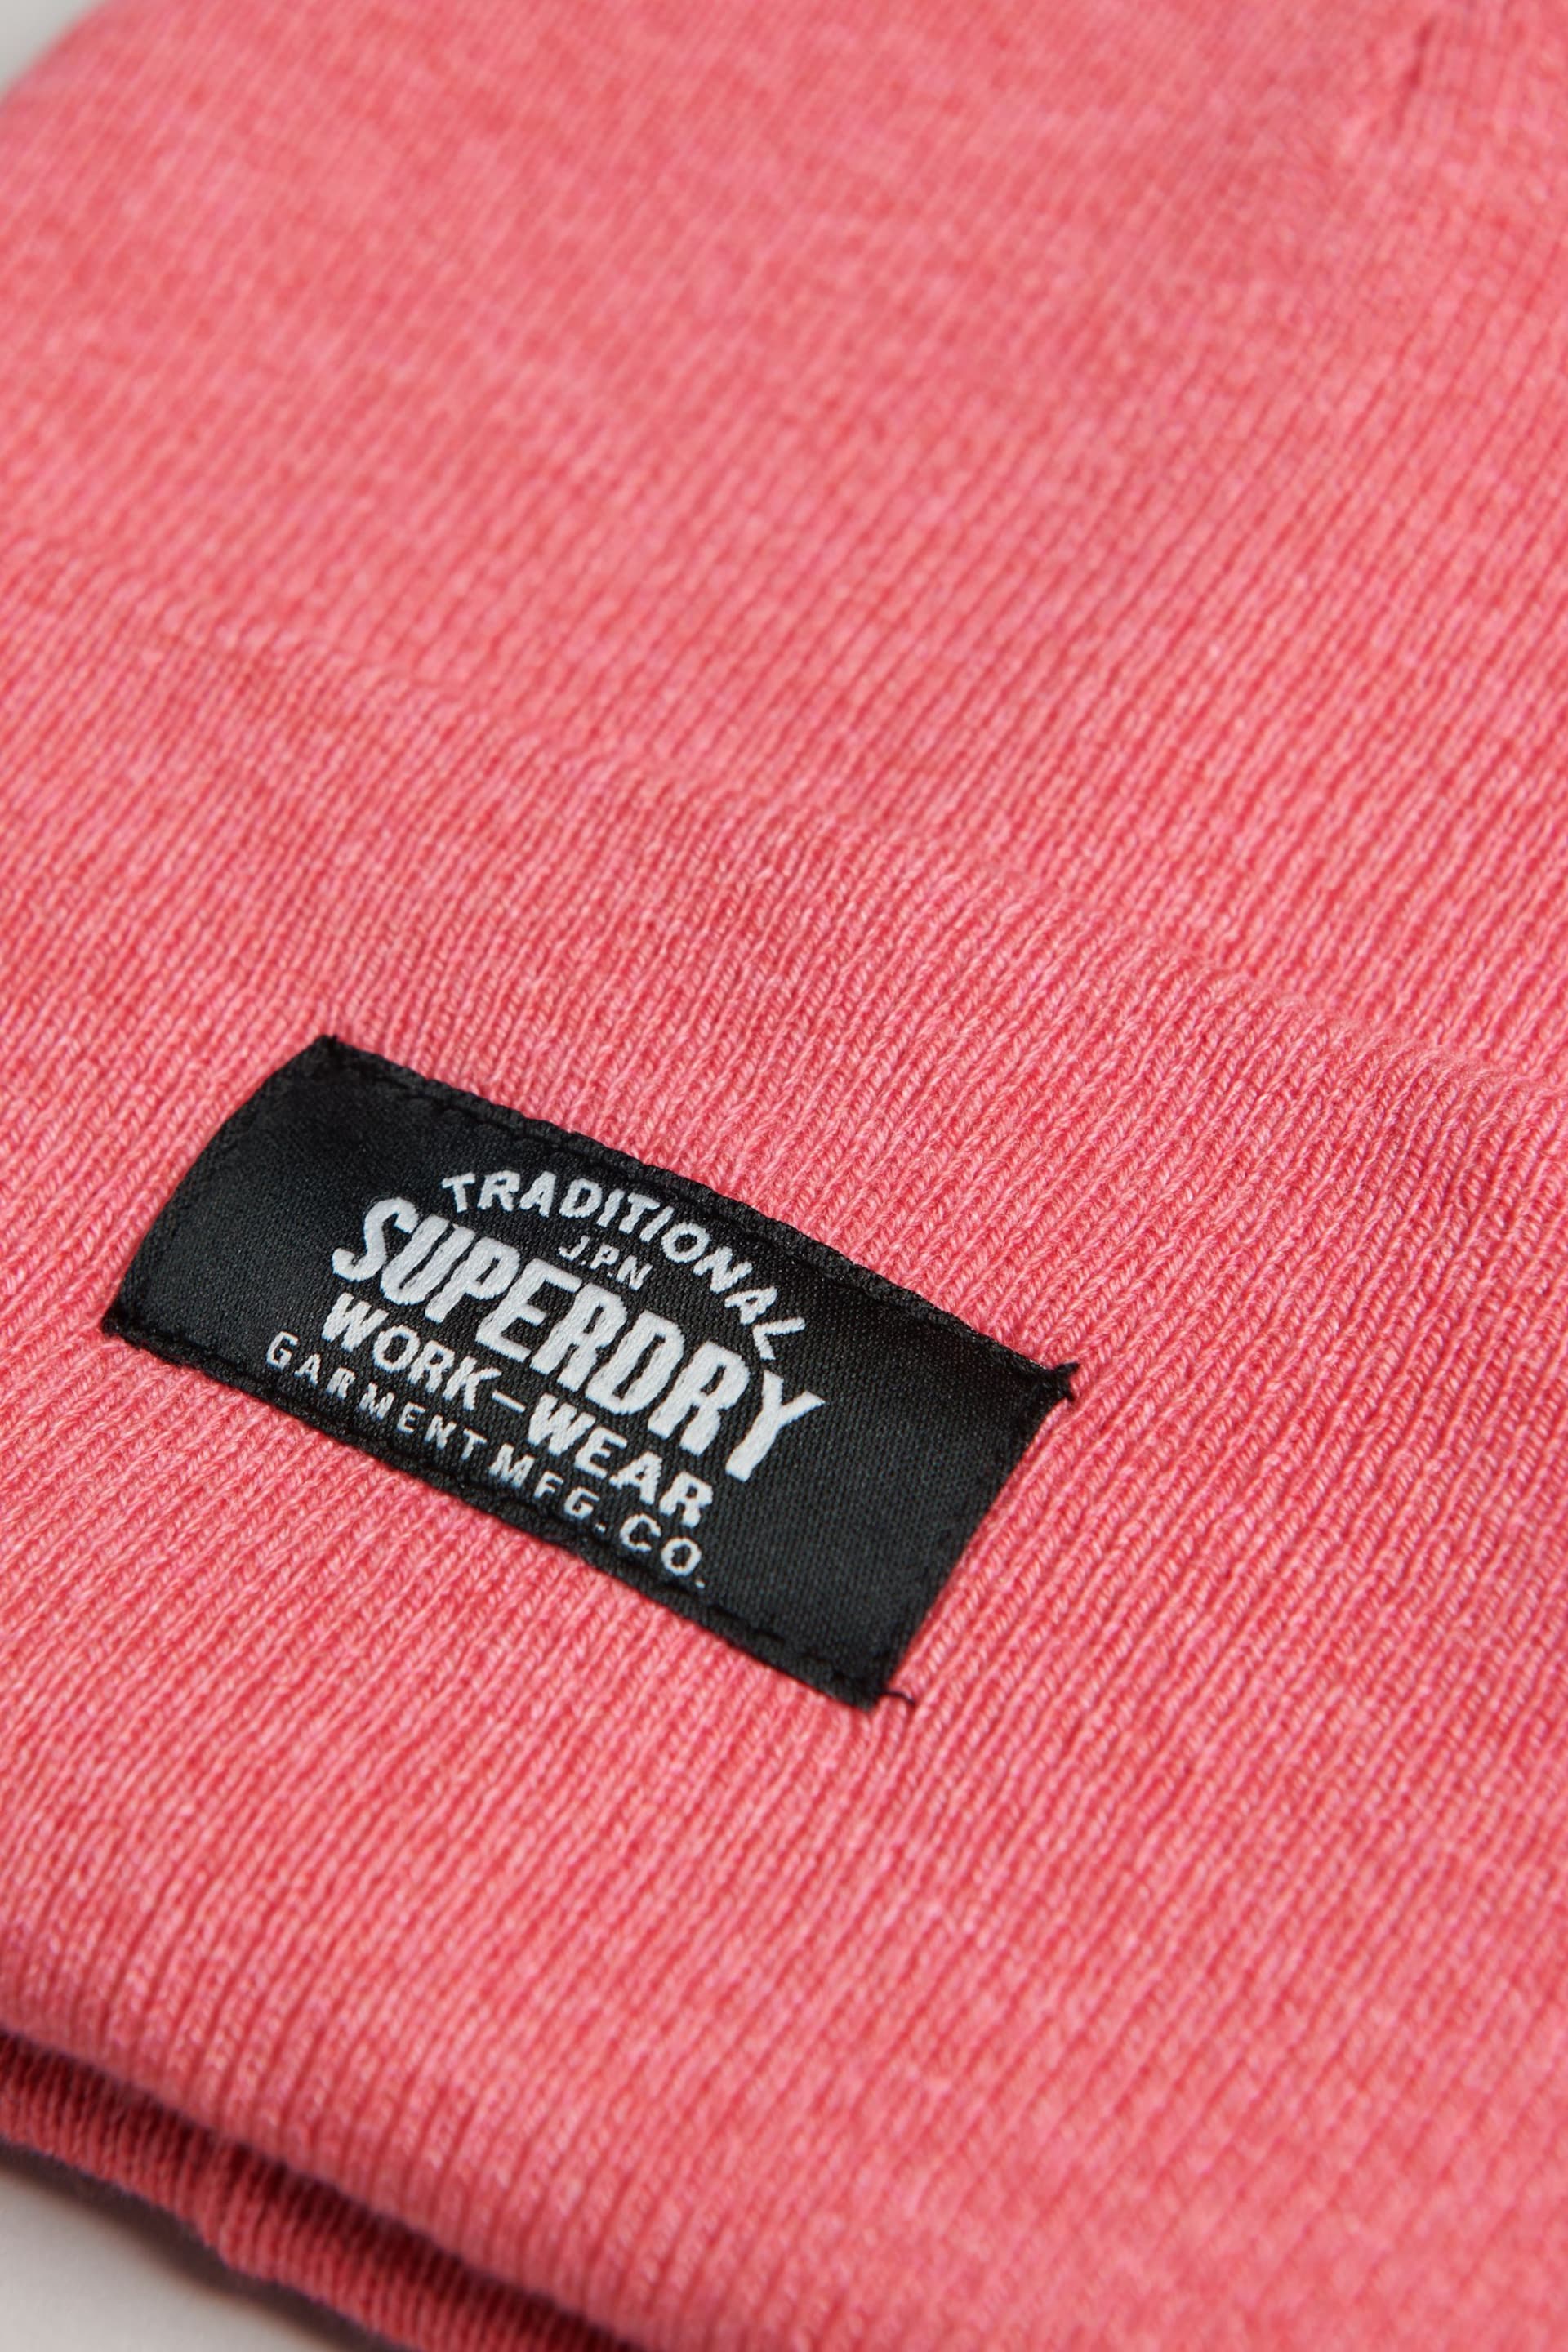 Superdry Pink Classic Knitted Beanie Hat - Image 3 of 3